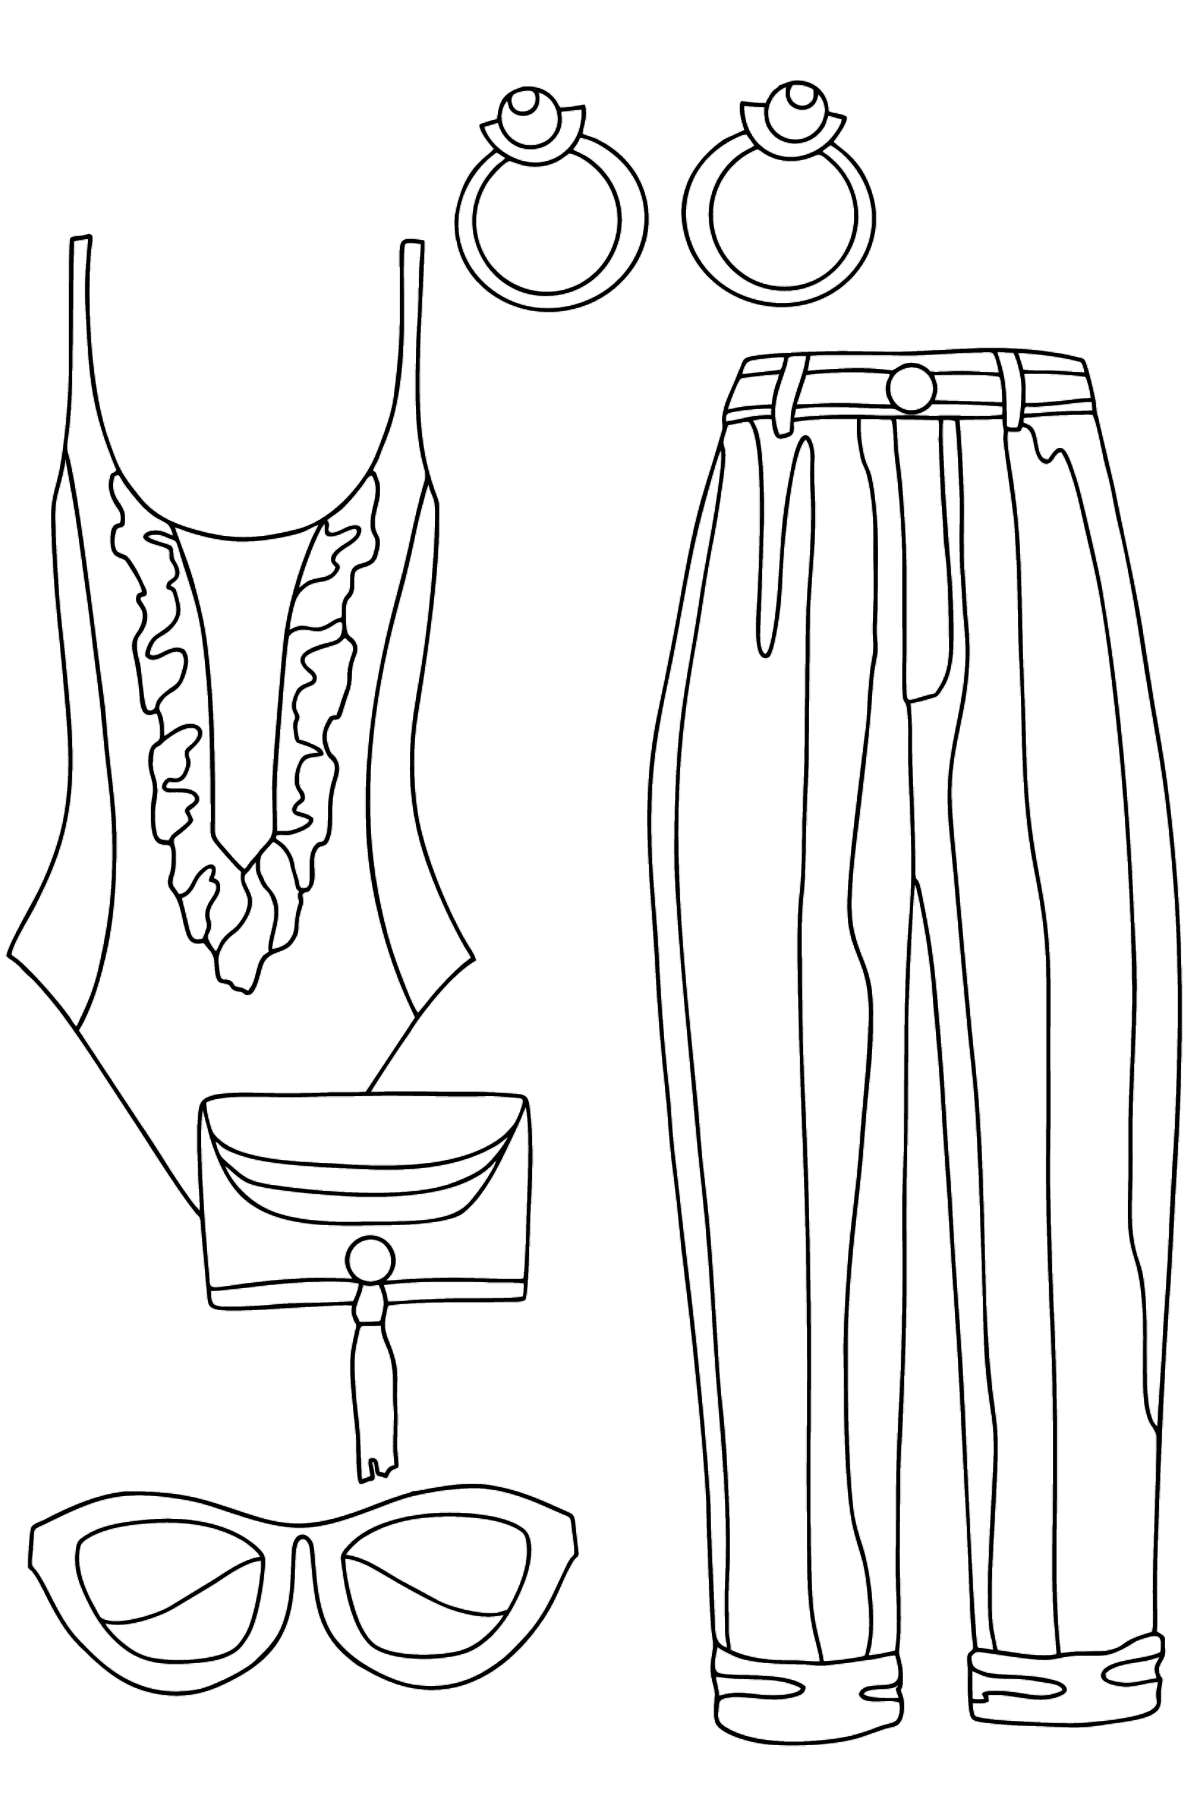 Fashion & Style coloring pages for Adults - Online or Printable